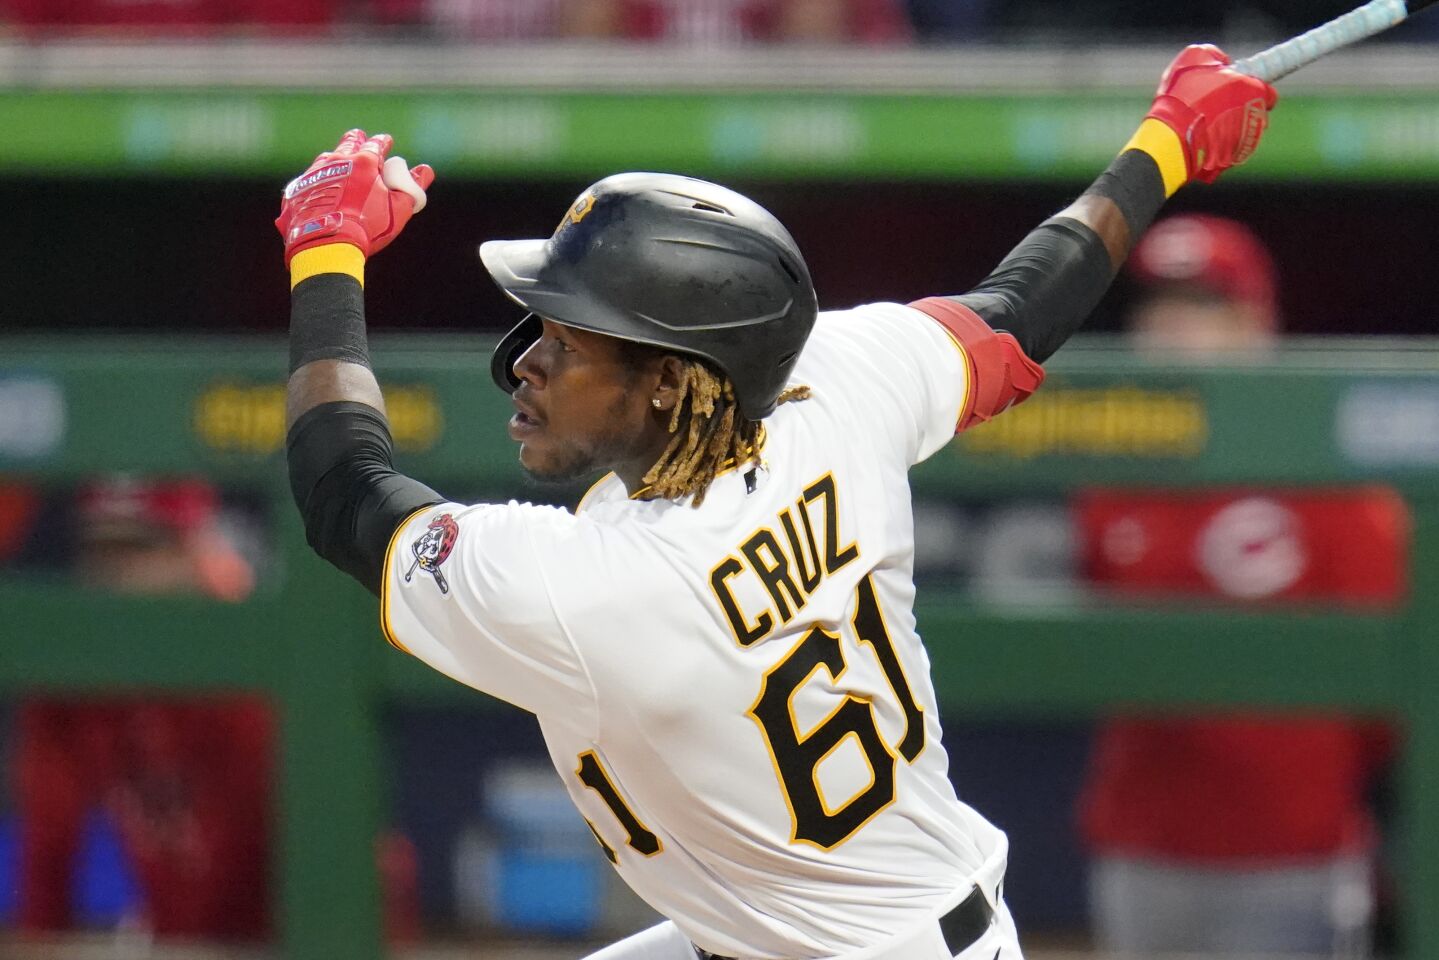 29 | Pittsburgh Pirates (61-101, 5th in NL Central)The Pirates are going to Pirate, new CBA be damned: 23-year-old shortstop Oneil Cruz, who homered twice this spring after hitting .310/.375/.594 last year in the high minors.